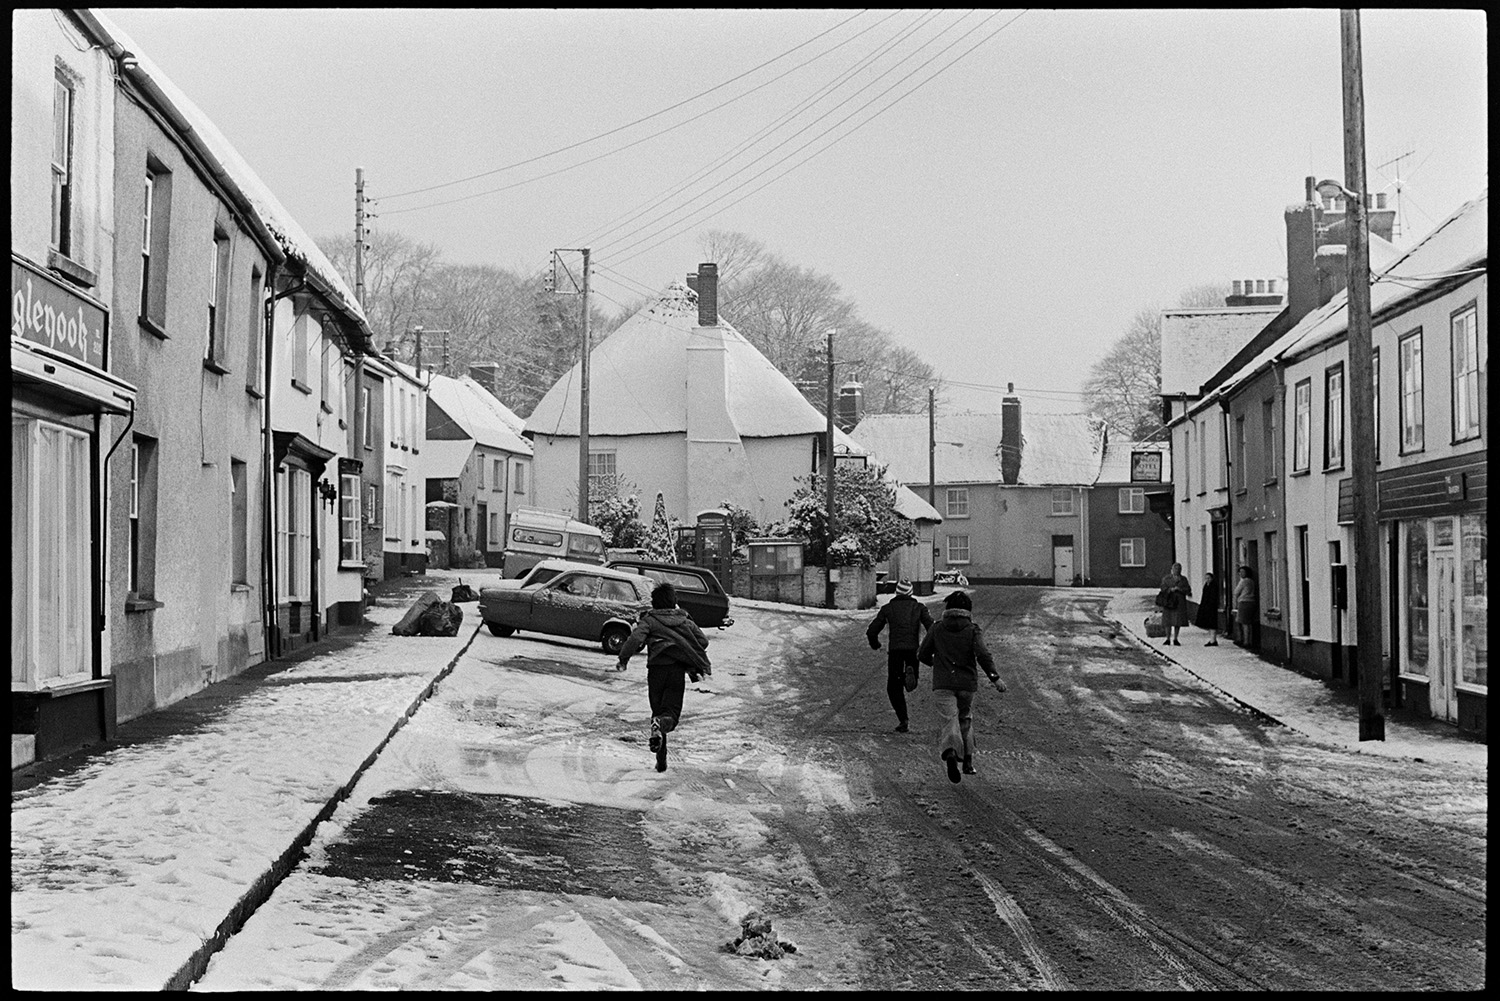 Children throwing snowballs in snowy village square. 
[Children running down a snow covered street in Winkleigh. Shop fronts and parked cars can be seen along the street.]